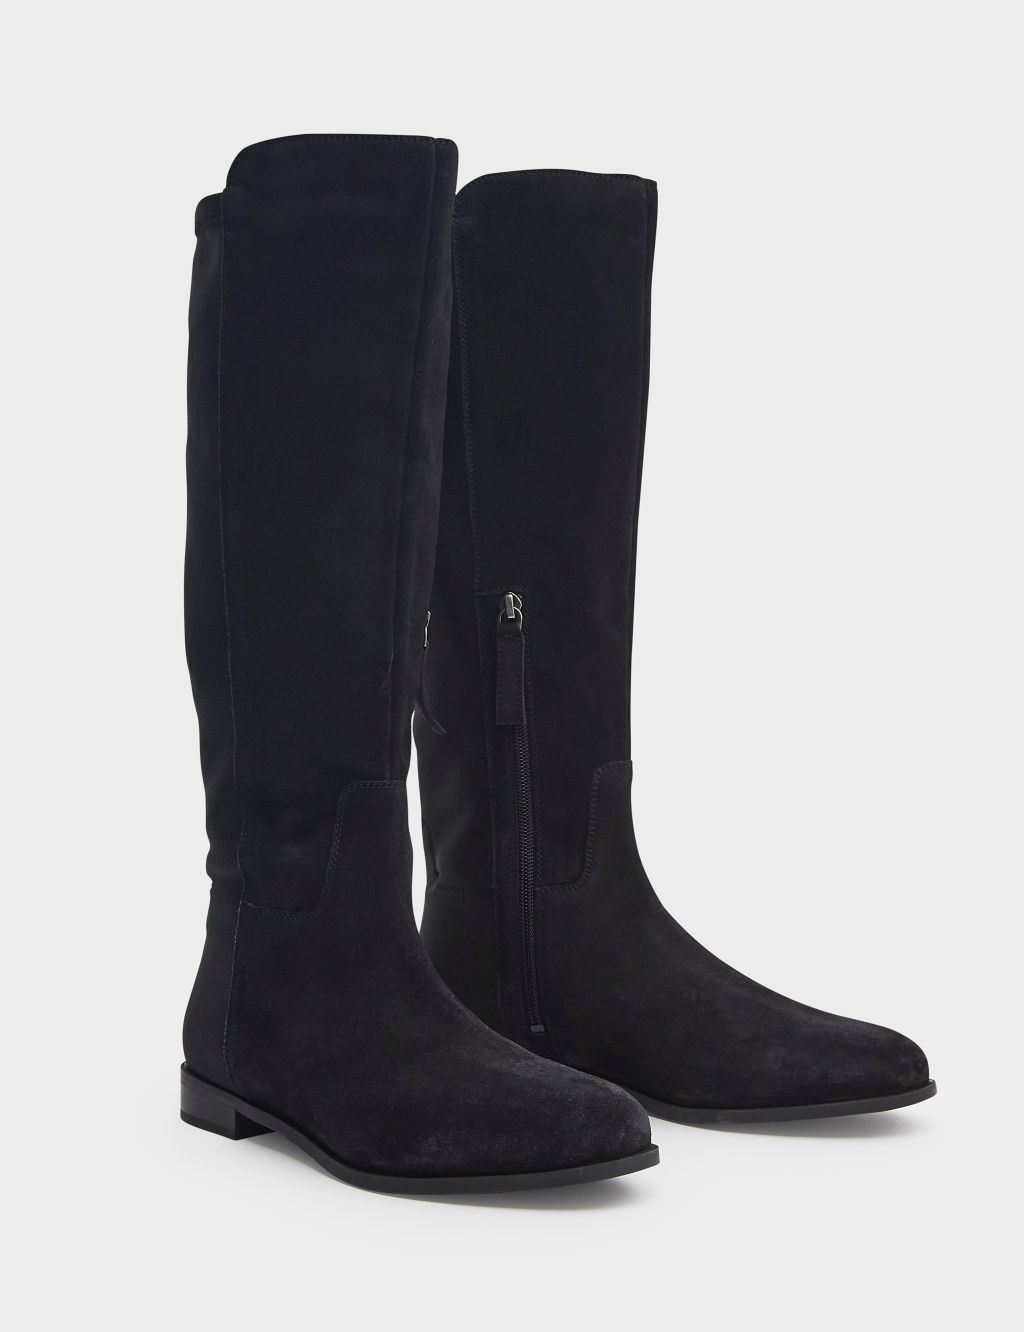 Suede Flat Knee High Boots image 2